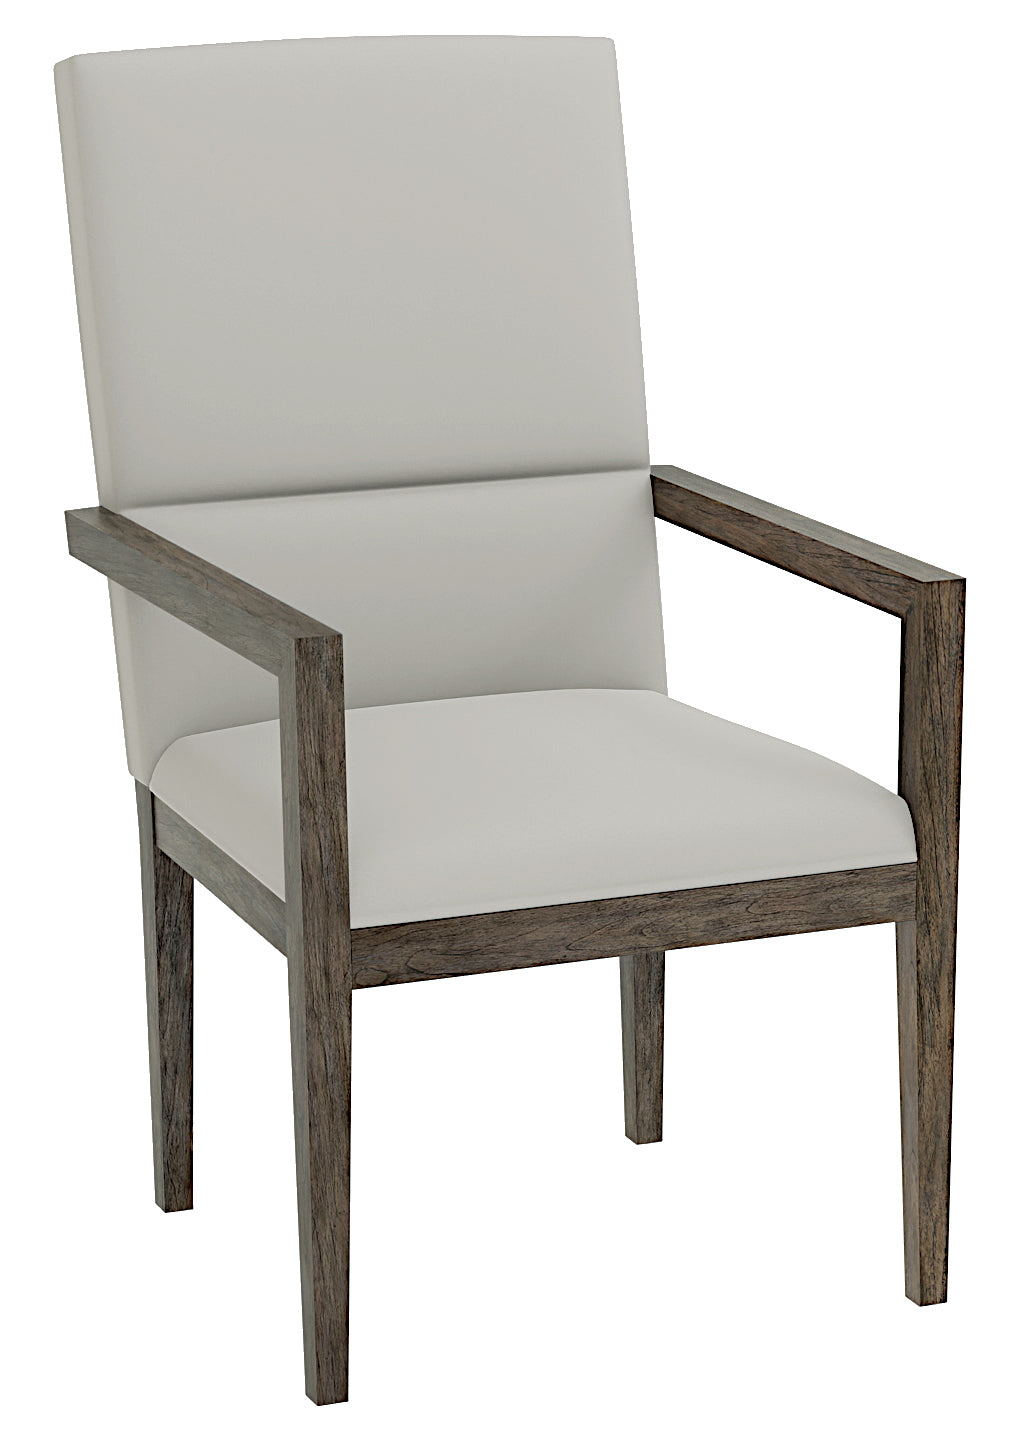 Hekman 25822 Arlington Heights 23.5in. x 27in. x 40in. Dining Arm Chair